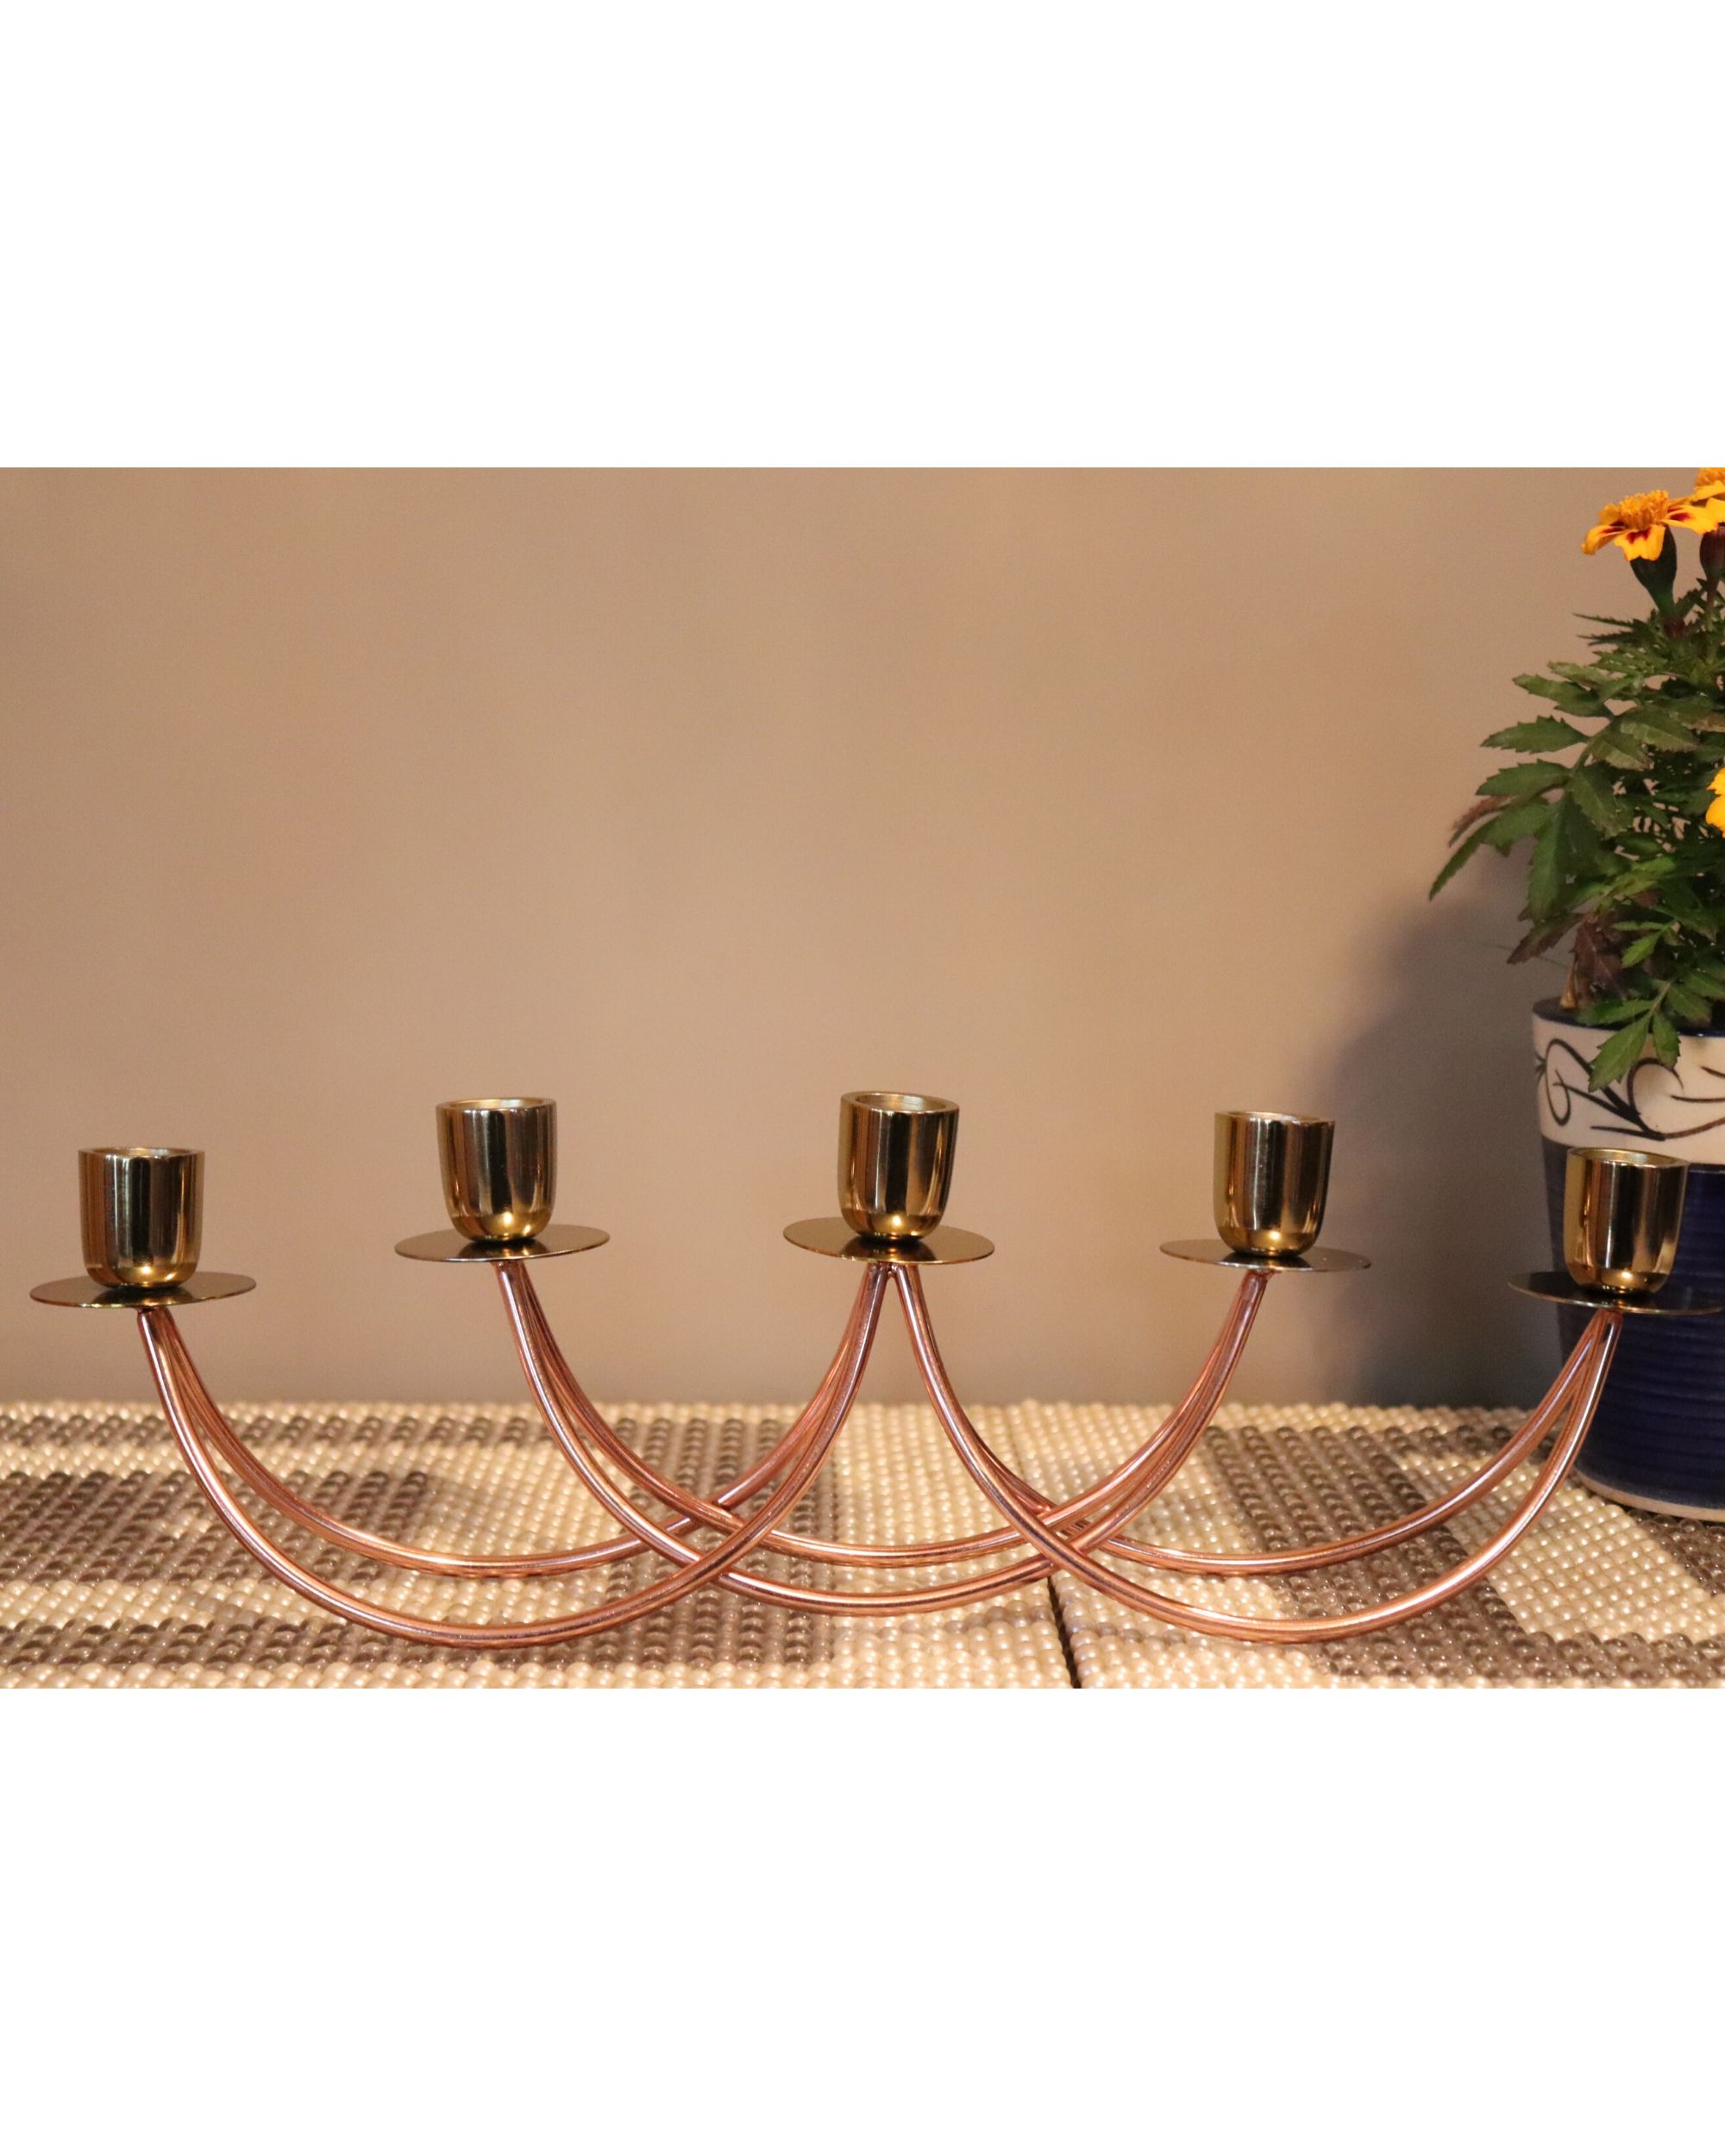 Aluminum and steel candelabra for five candles